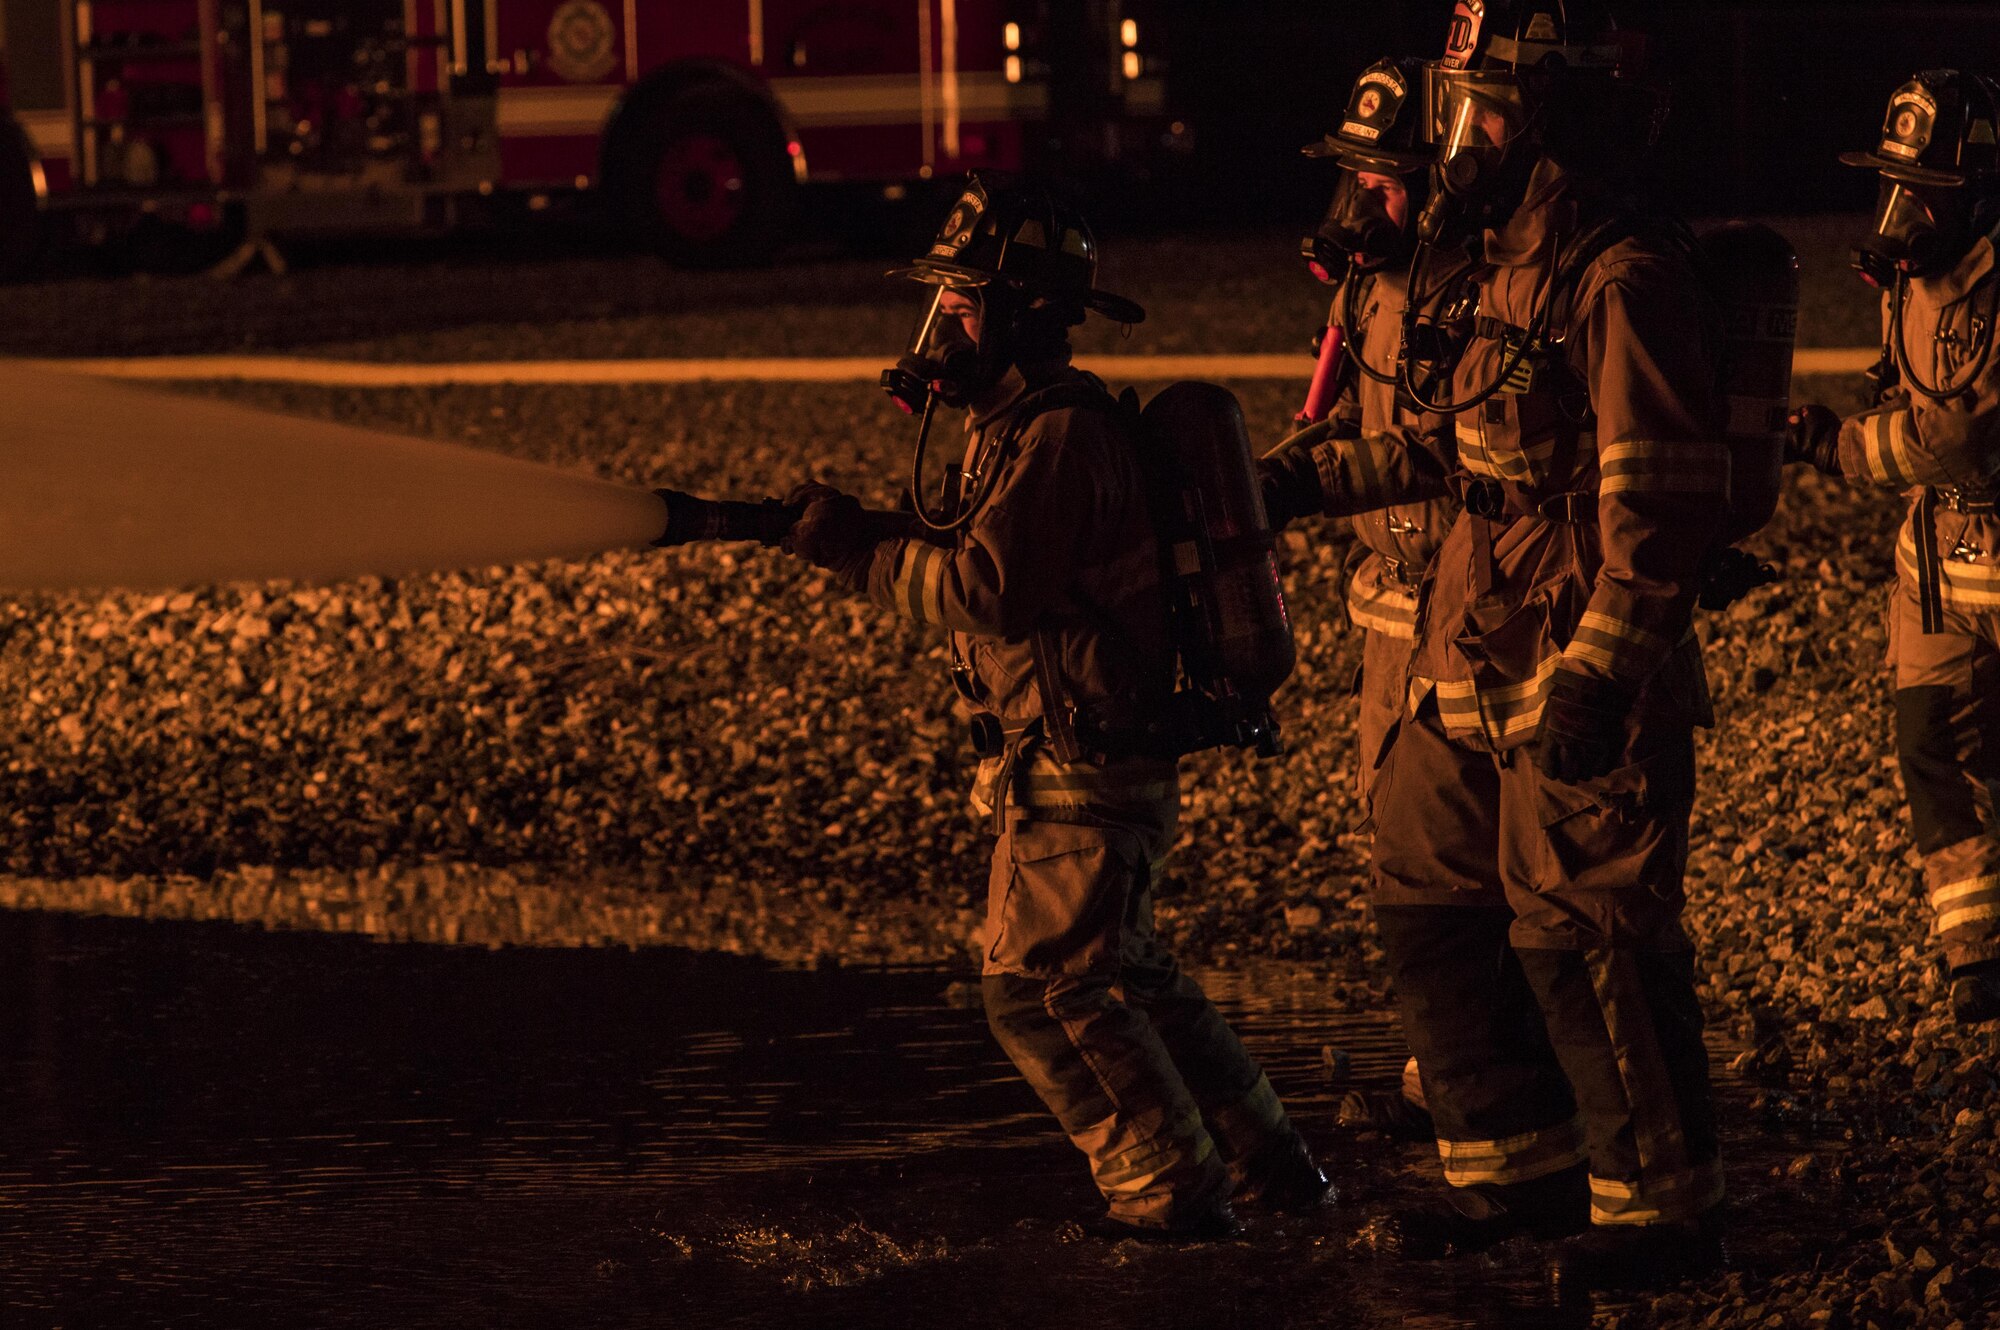 Firefighters from Moody and the Valdosta Fire Department put out a blaze during nighttime live-fire training, Nov. 8, 2017, at Moody Air Force Base, Ga. In addition to combatting fires outside the prop aircraft, firefighters had to enter and combat the fires inside. (U.S. Air Force photo by Senior Airman Janiqua P. Robinson)